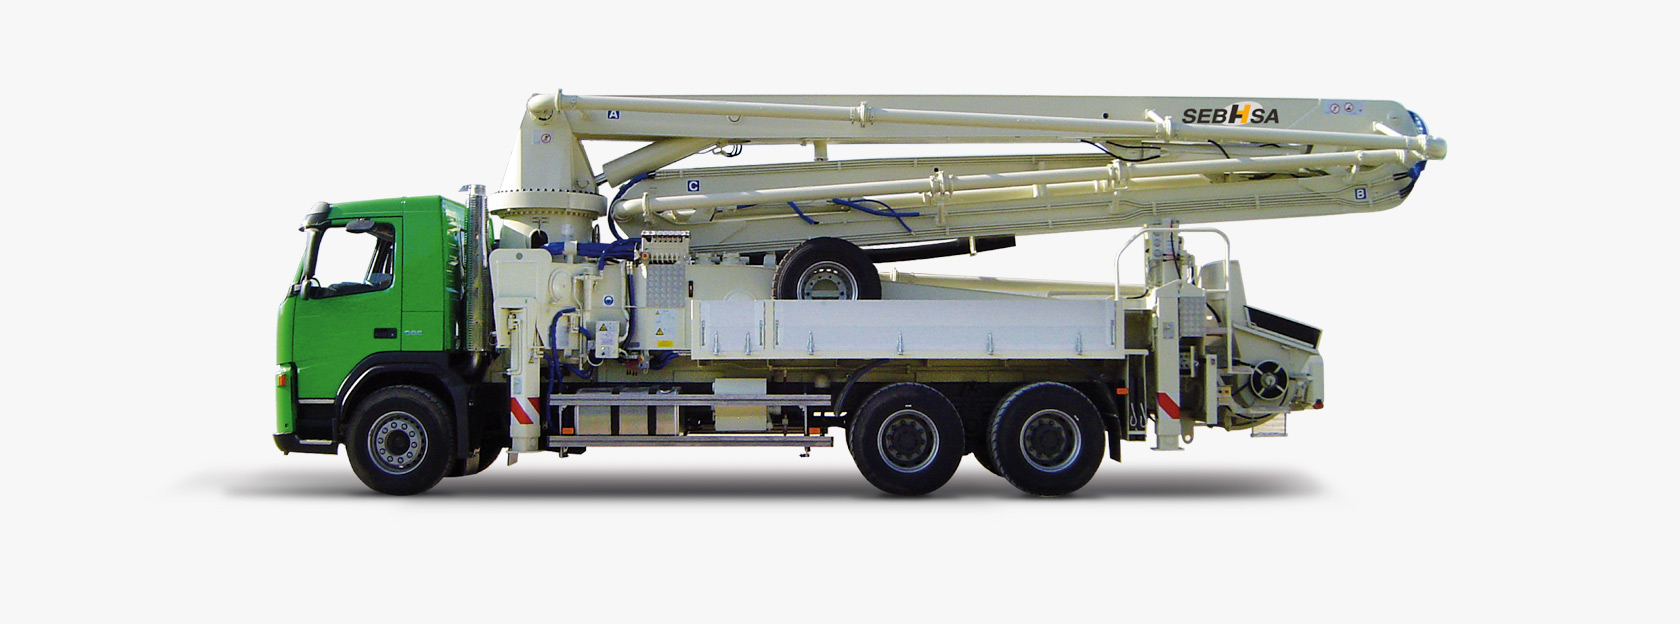 In SEBHSA we manufacture versatile and cost-effective concrete pumps on trucks That comply with country regulations and customer’s requirements.